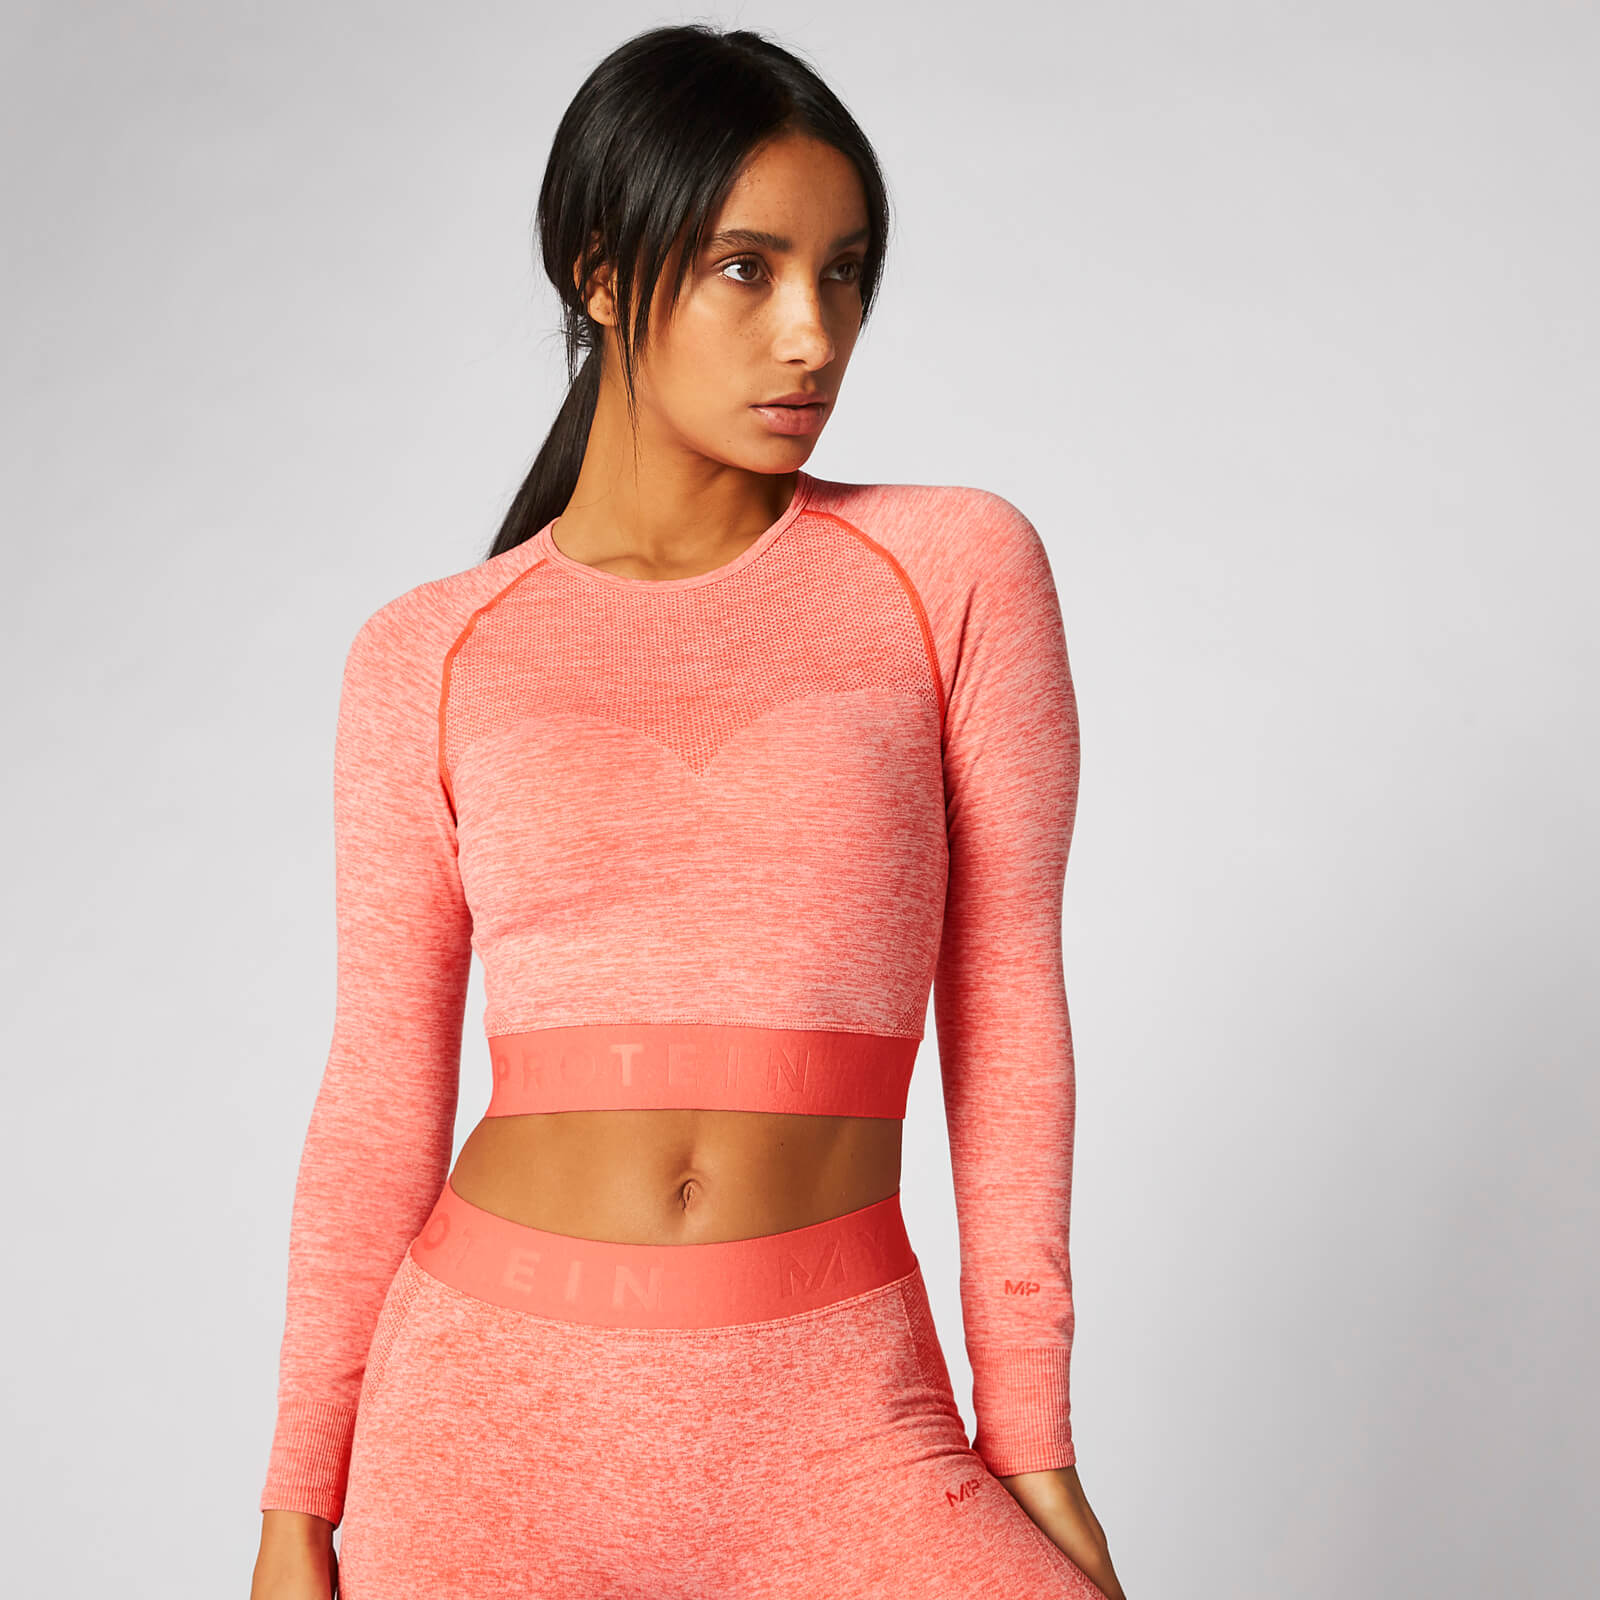 MP Inspire Seamless Crop Top - Hot Coral - XS